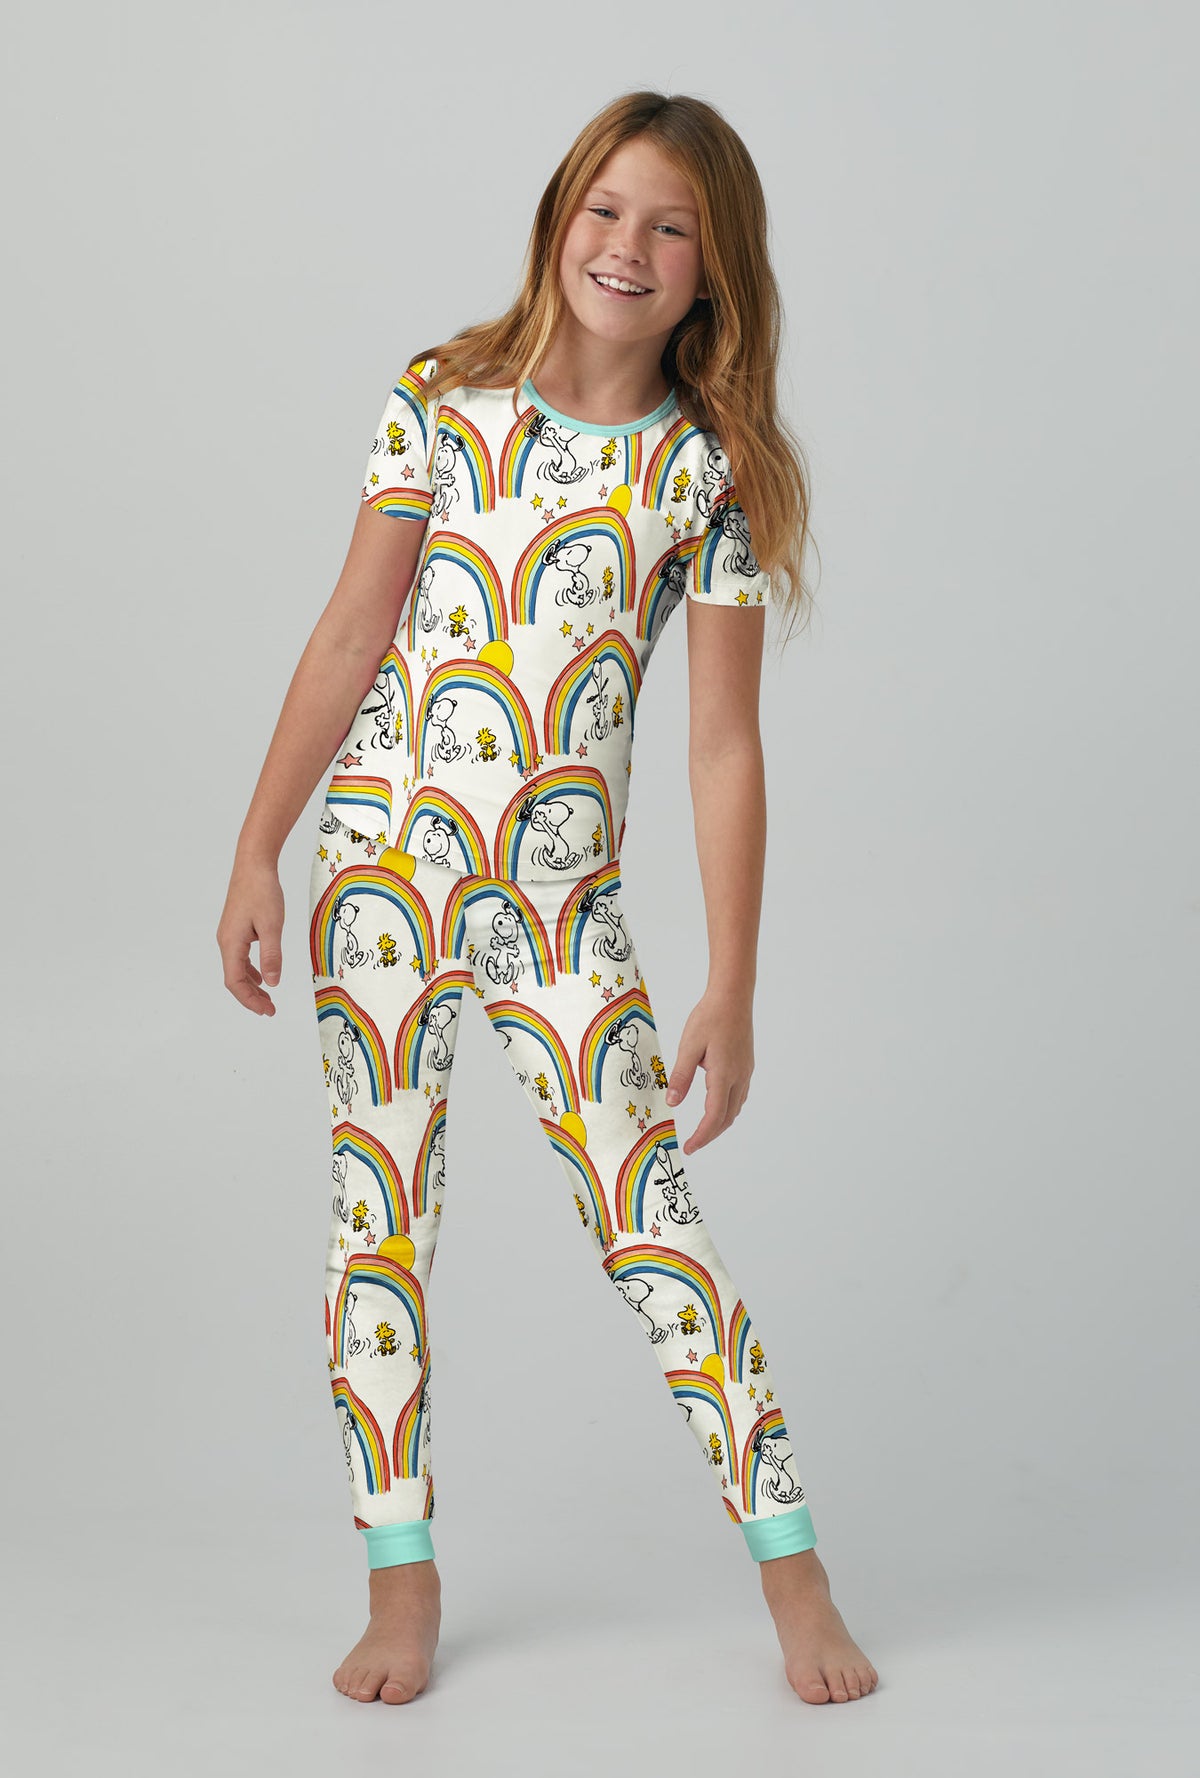 A girl wearing white Snoopy Long Sleeve Stretch Jersey Kids PJ Set with Sunshine print.